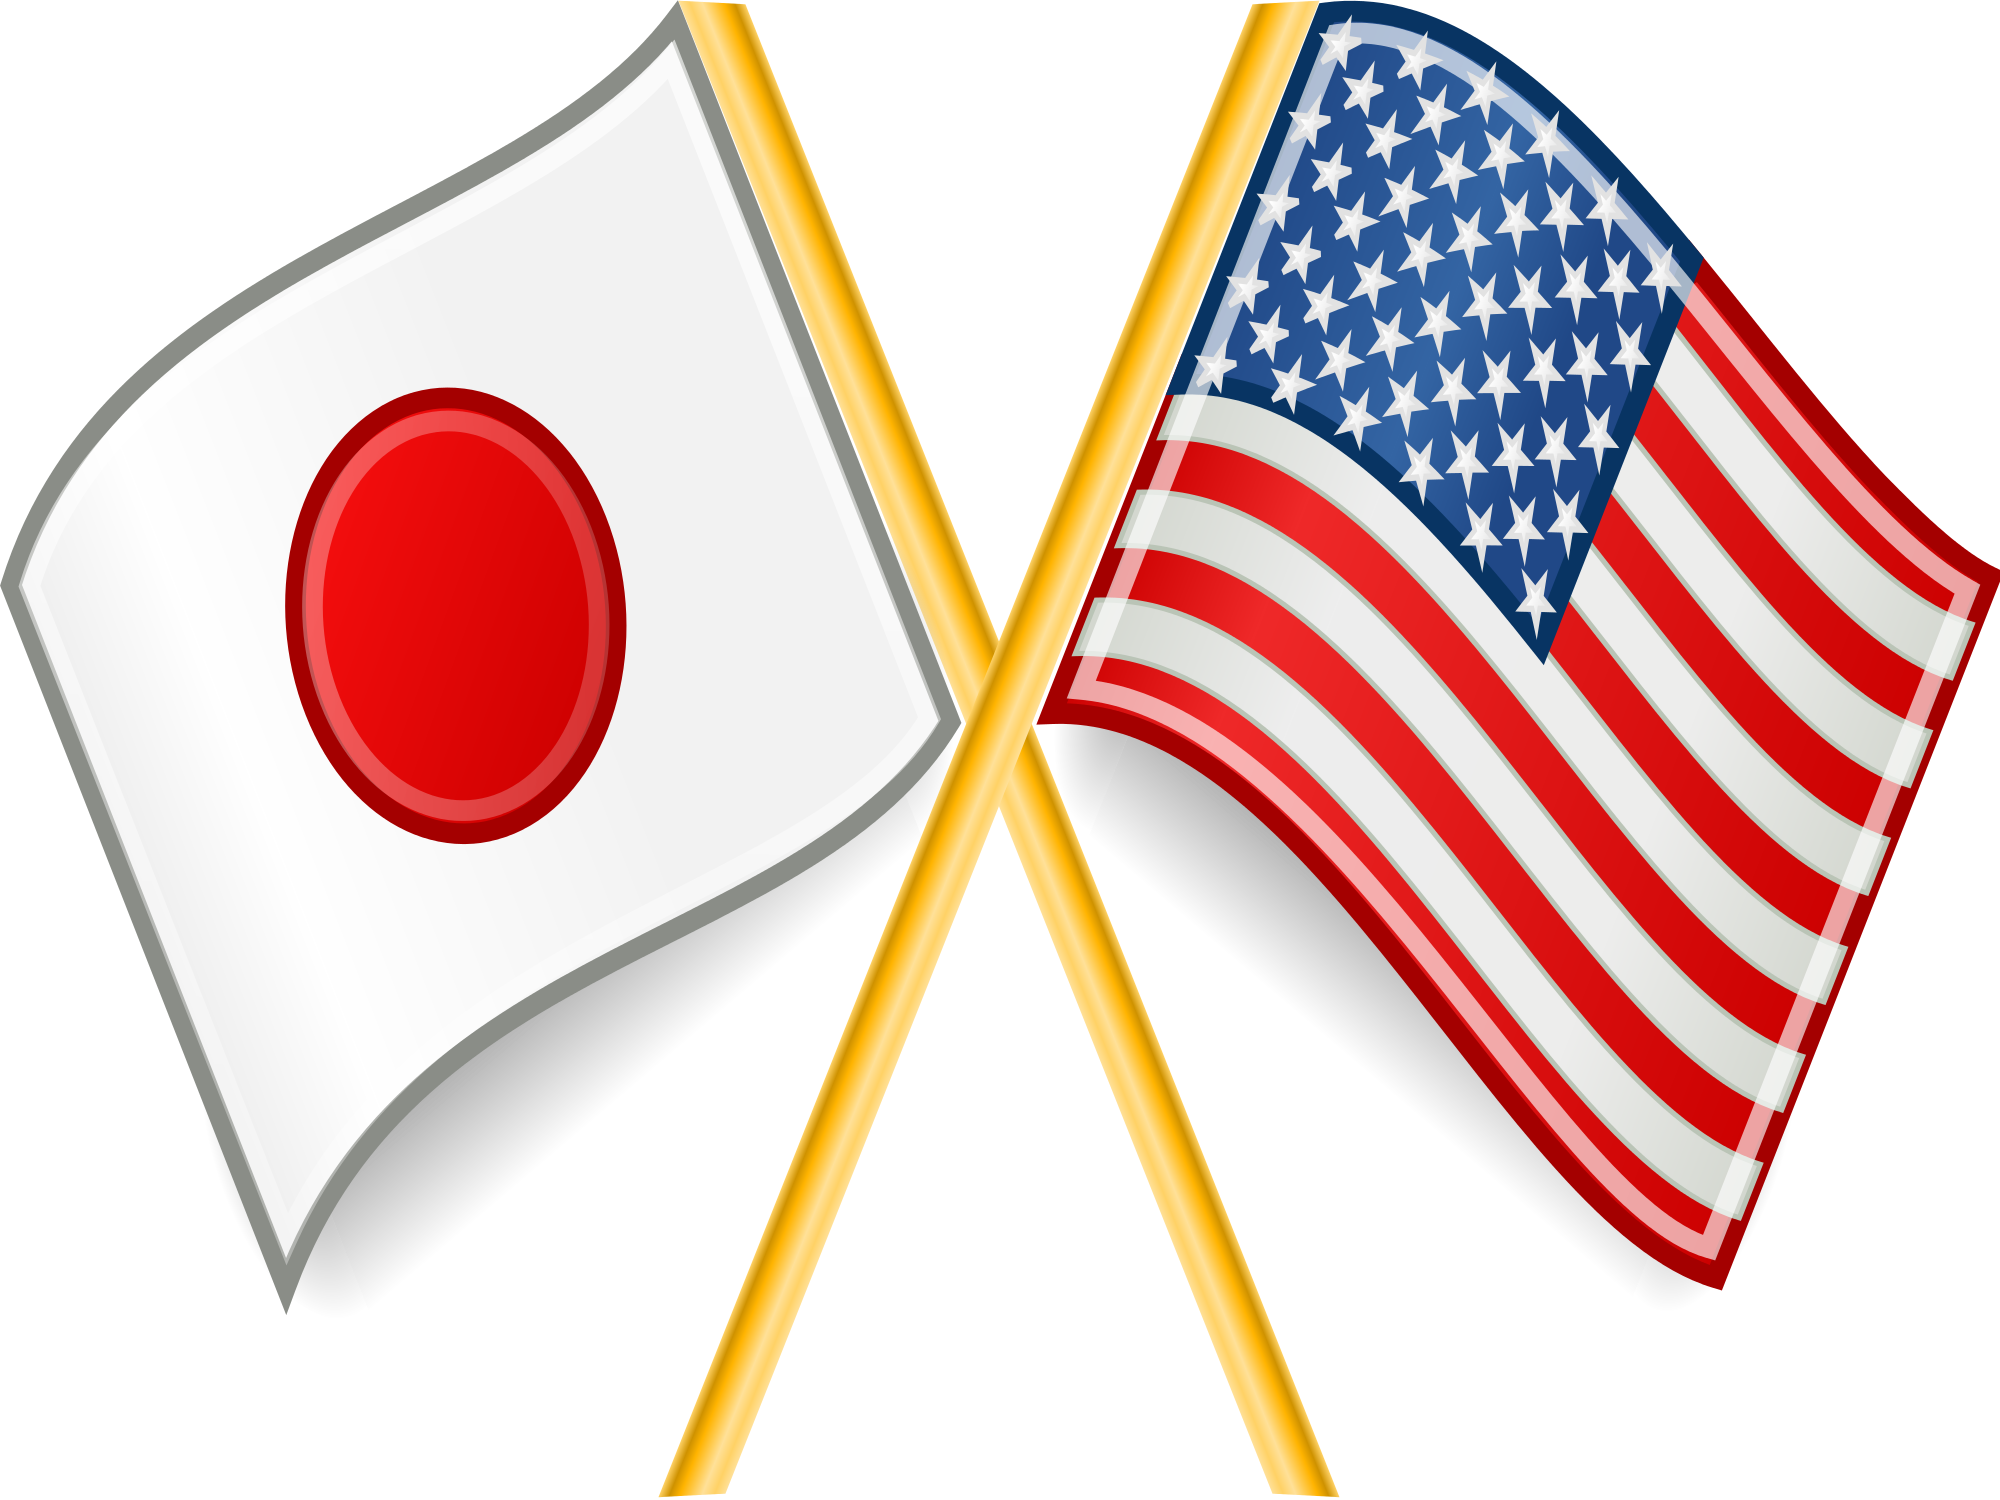 Japan And U - Japan And America Flags (2000x1500)